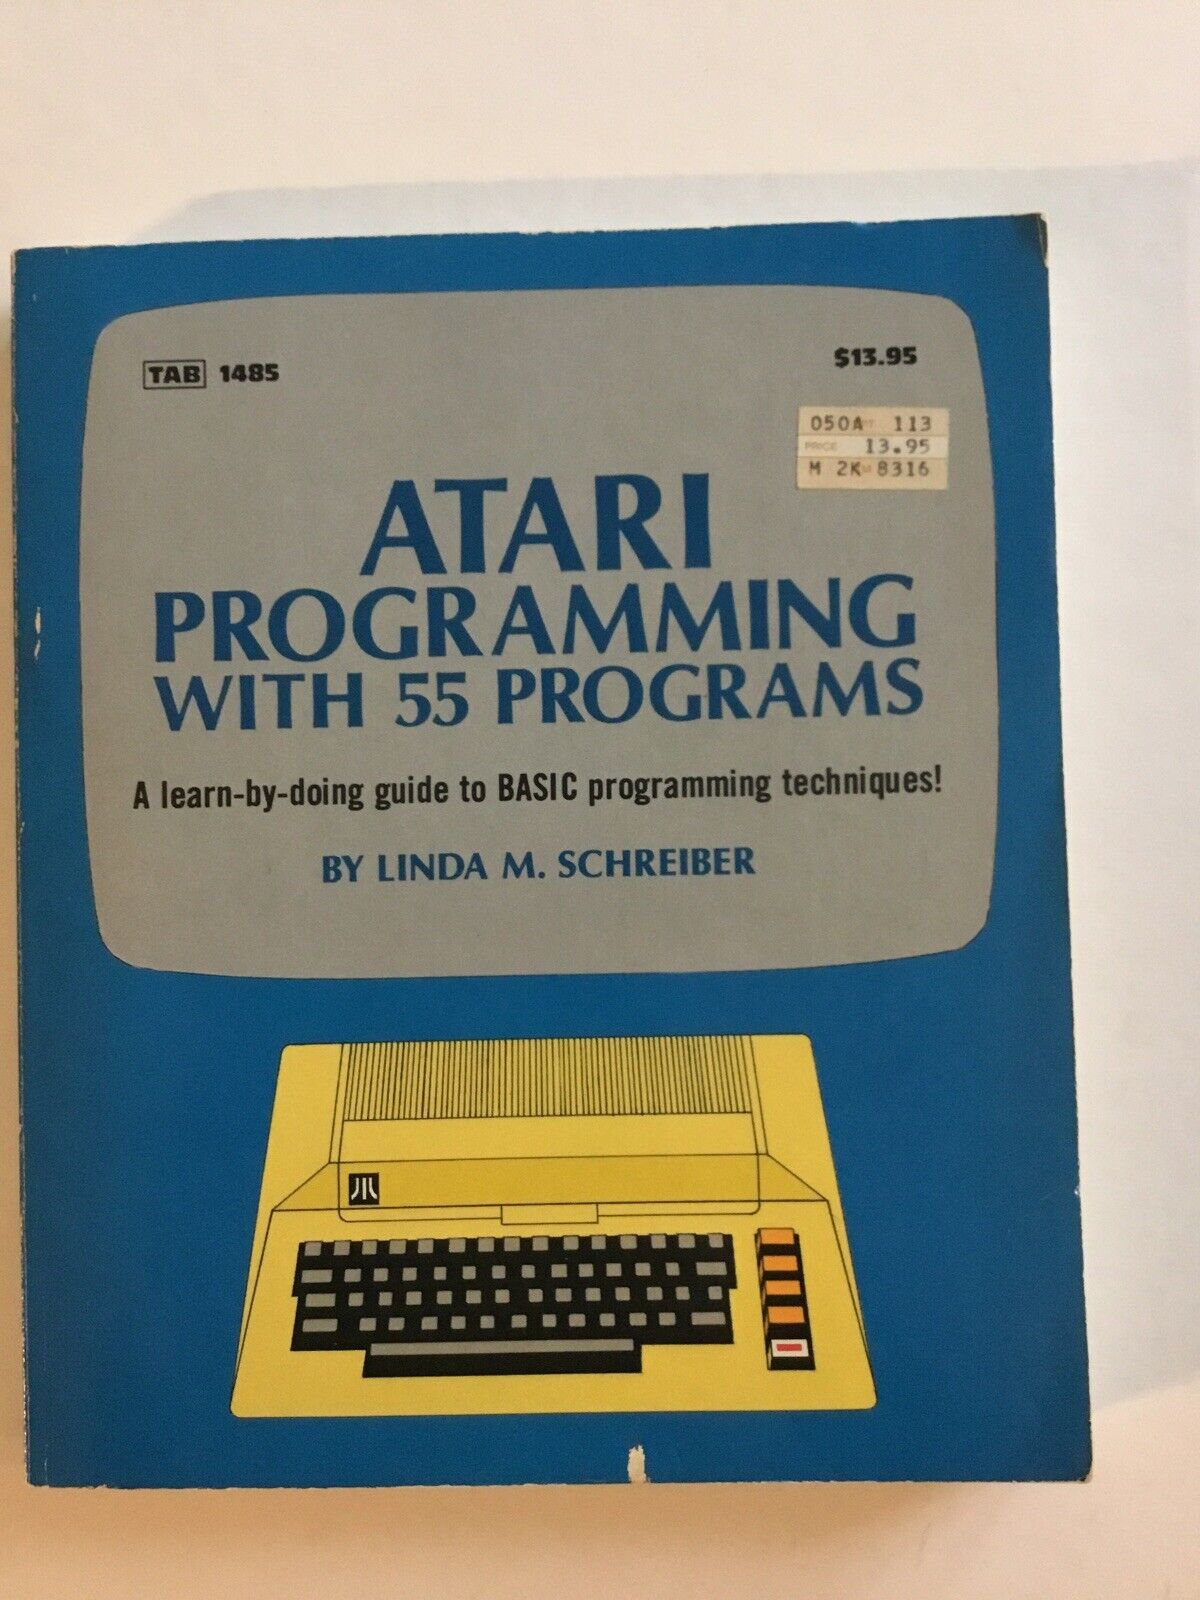 Atari Programming With 55 Programs by Lisa M. Schreiber - Pre-owned